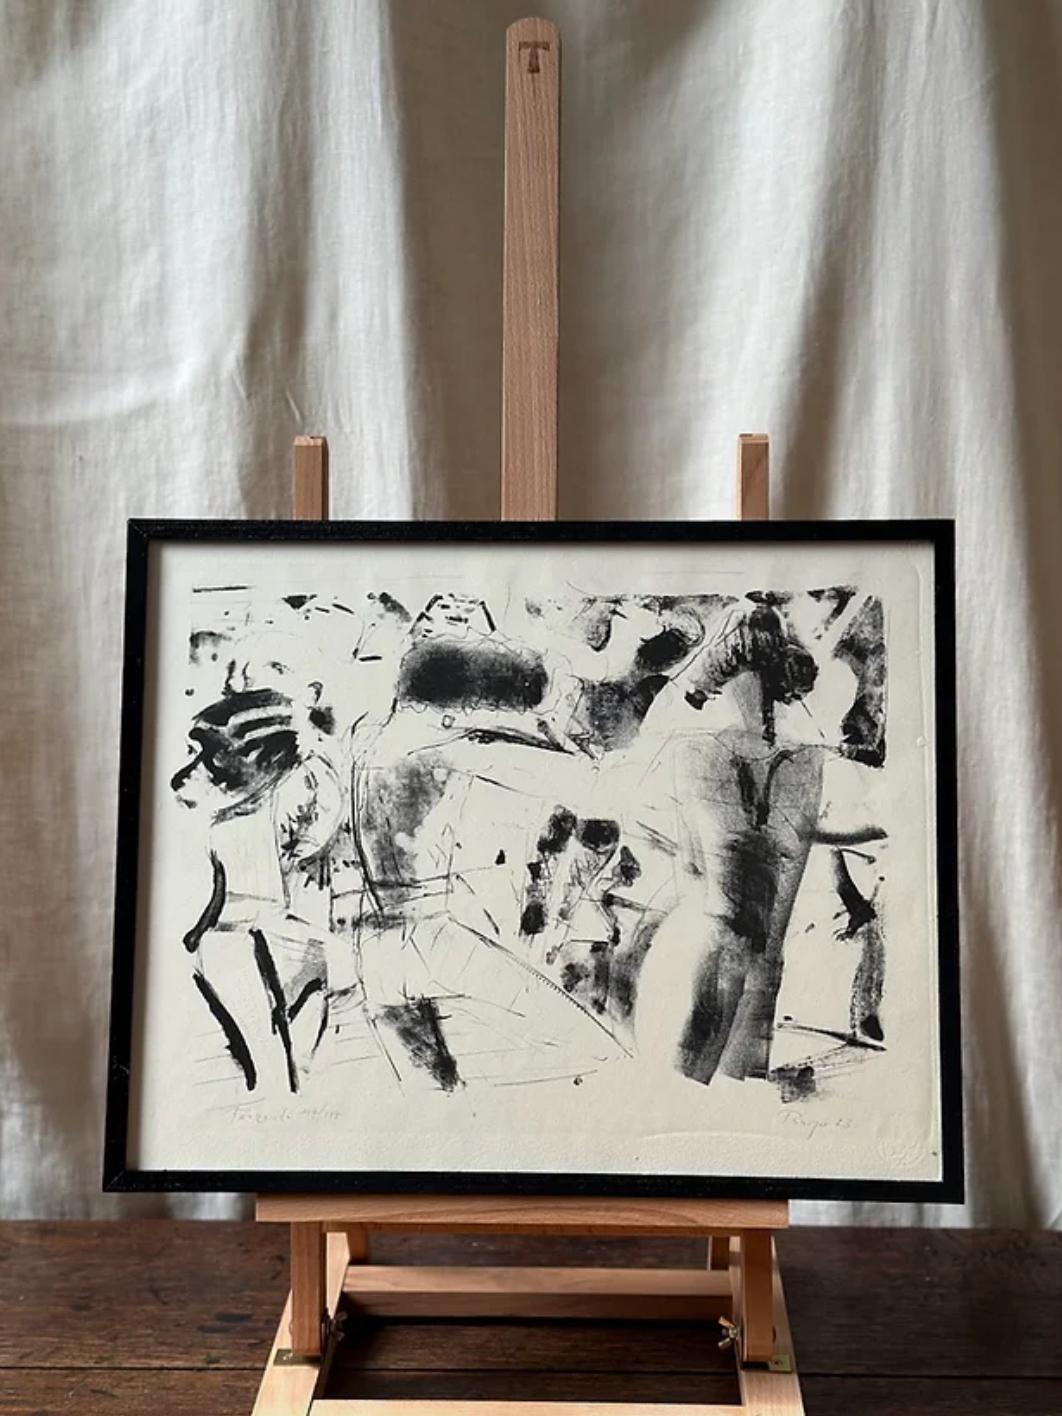 Framed Lithograph, Dance Company Leipzig, By Dietrich Burger (b 1935) , German In Good Condition For Sale In London, England